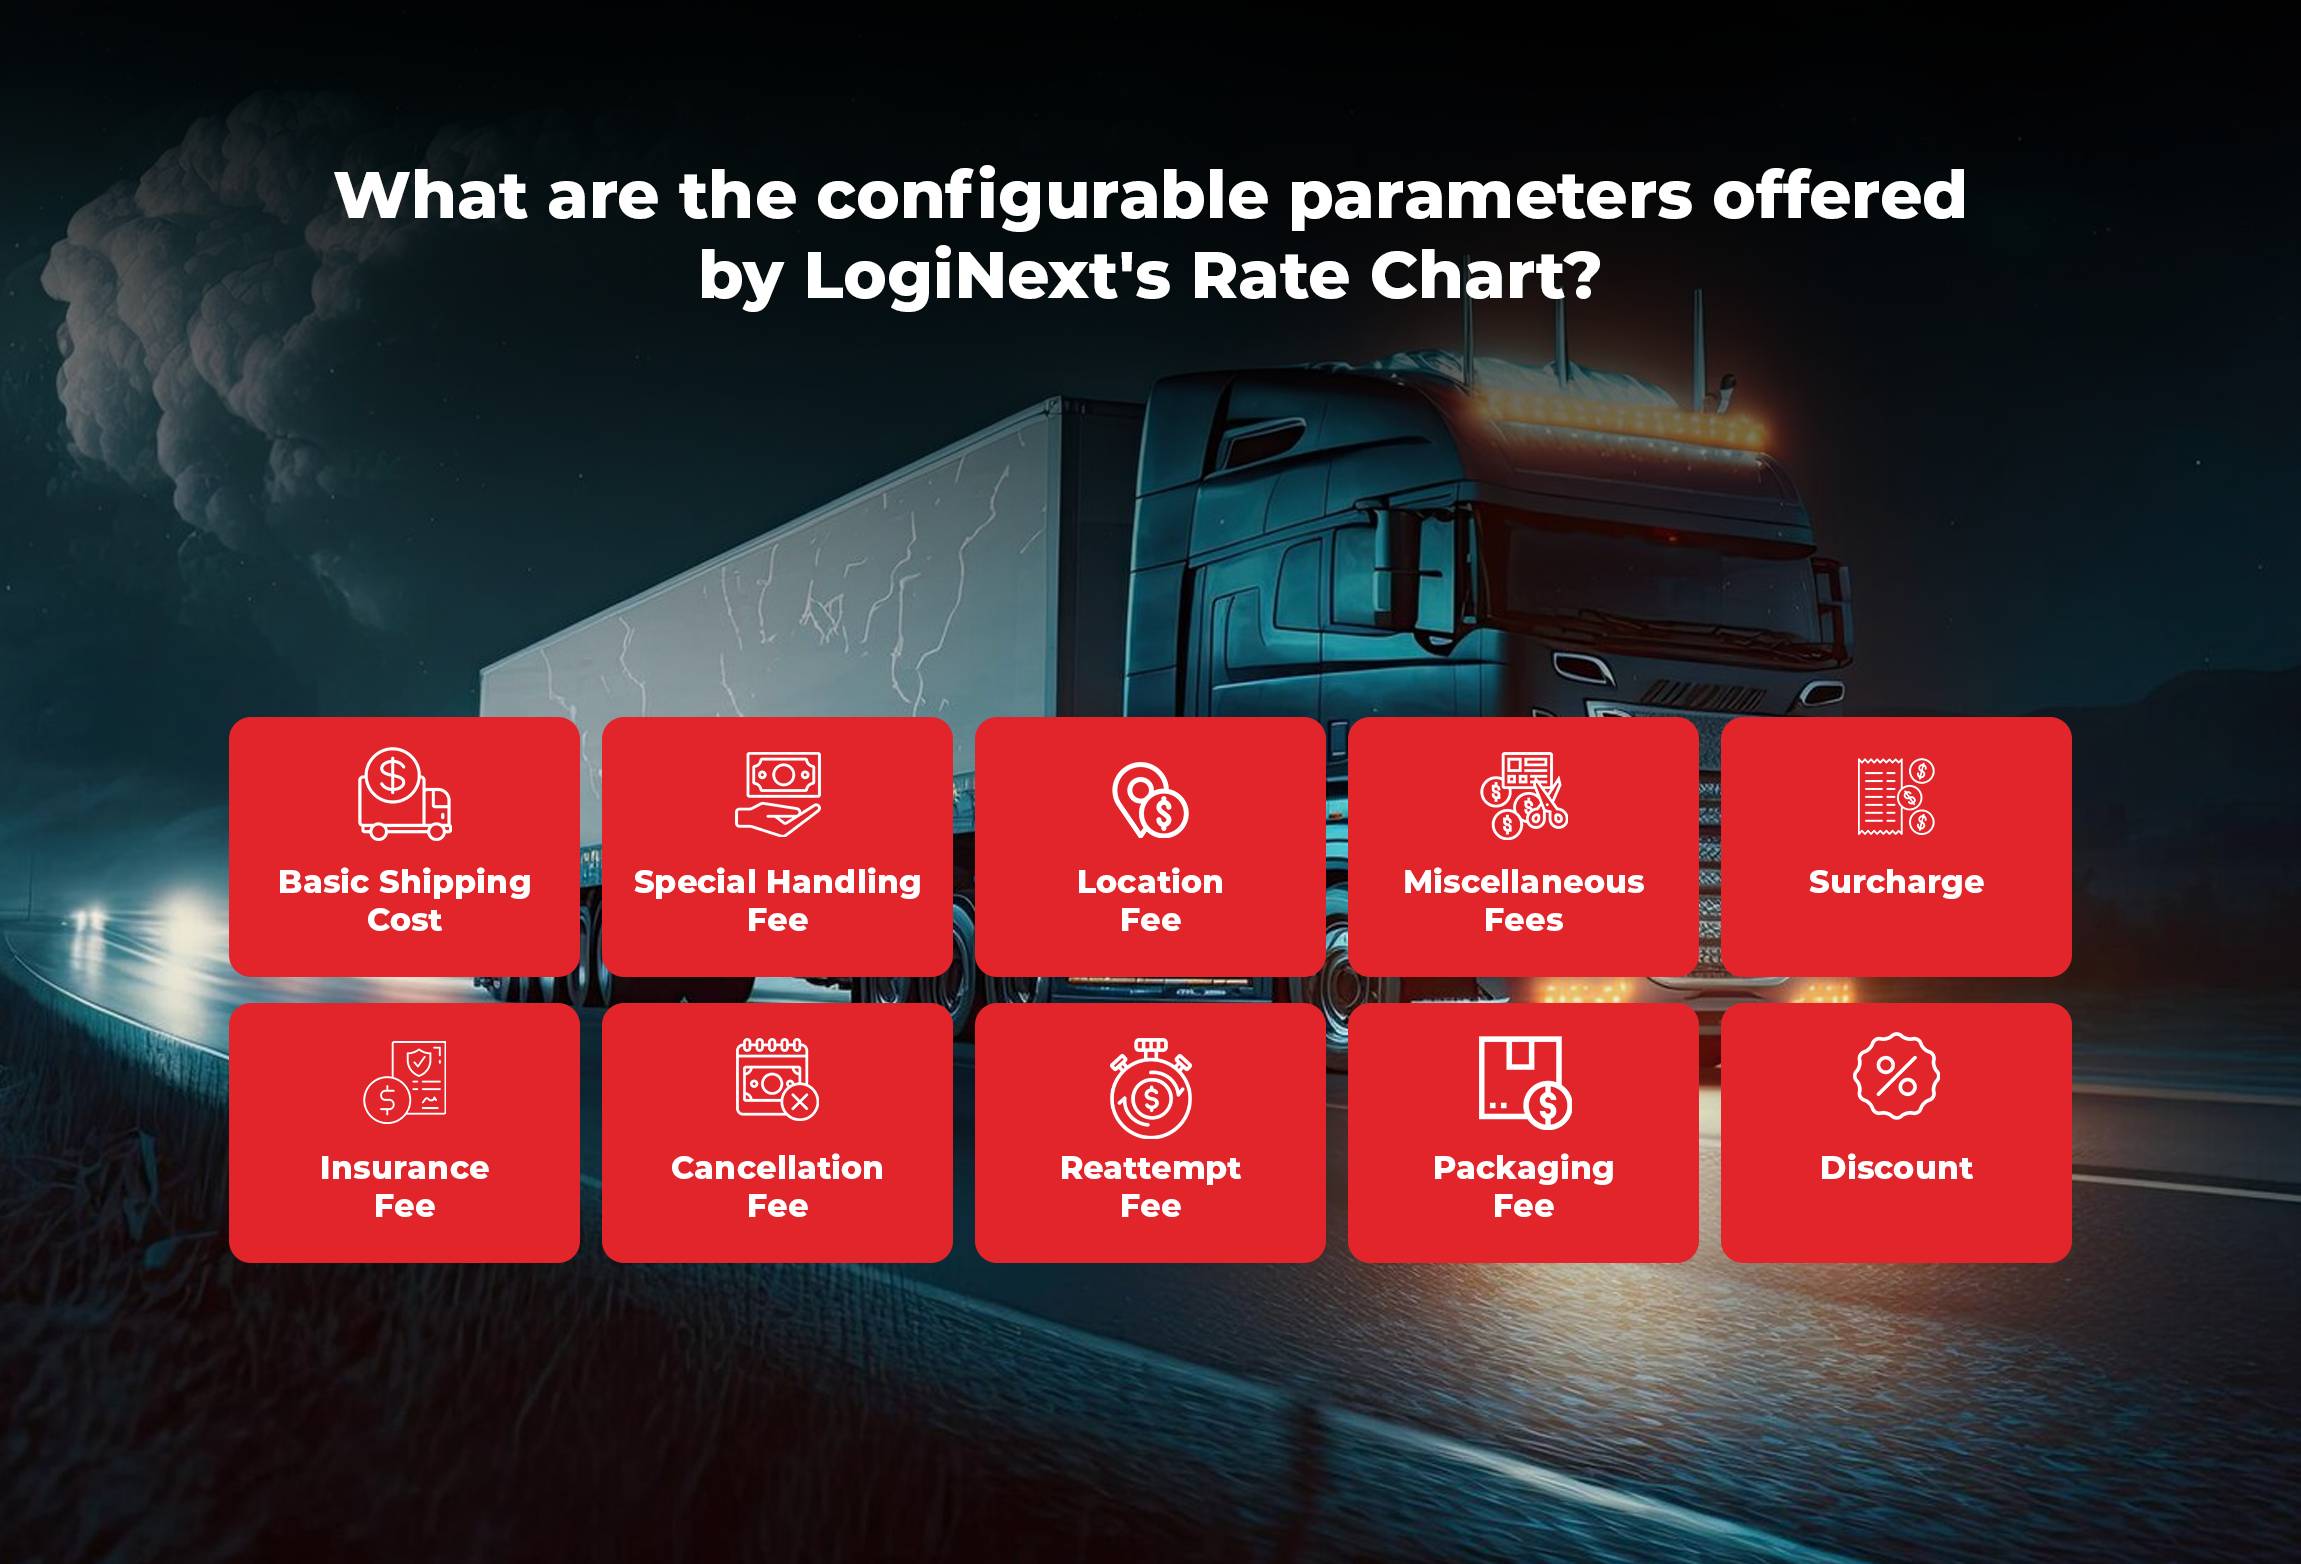 Configurable Parameters in LogiNext's Rate Chart